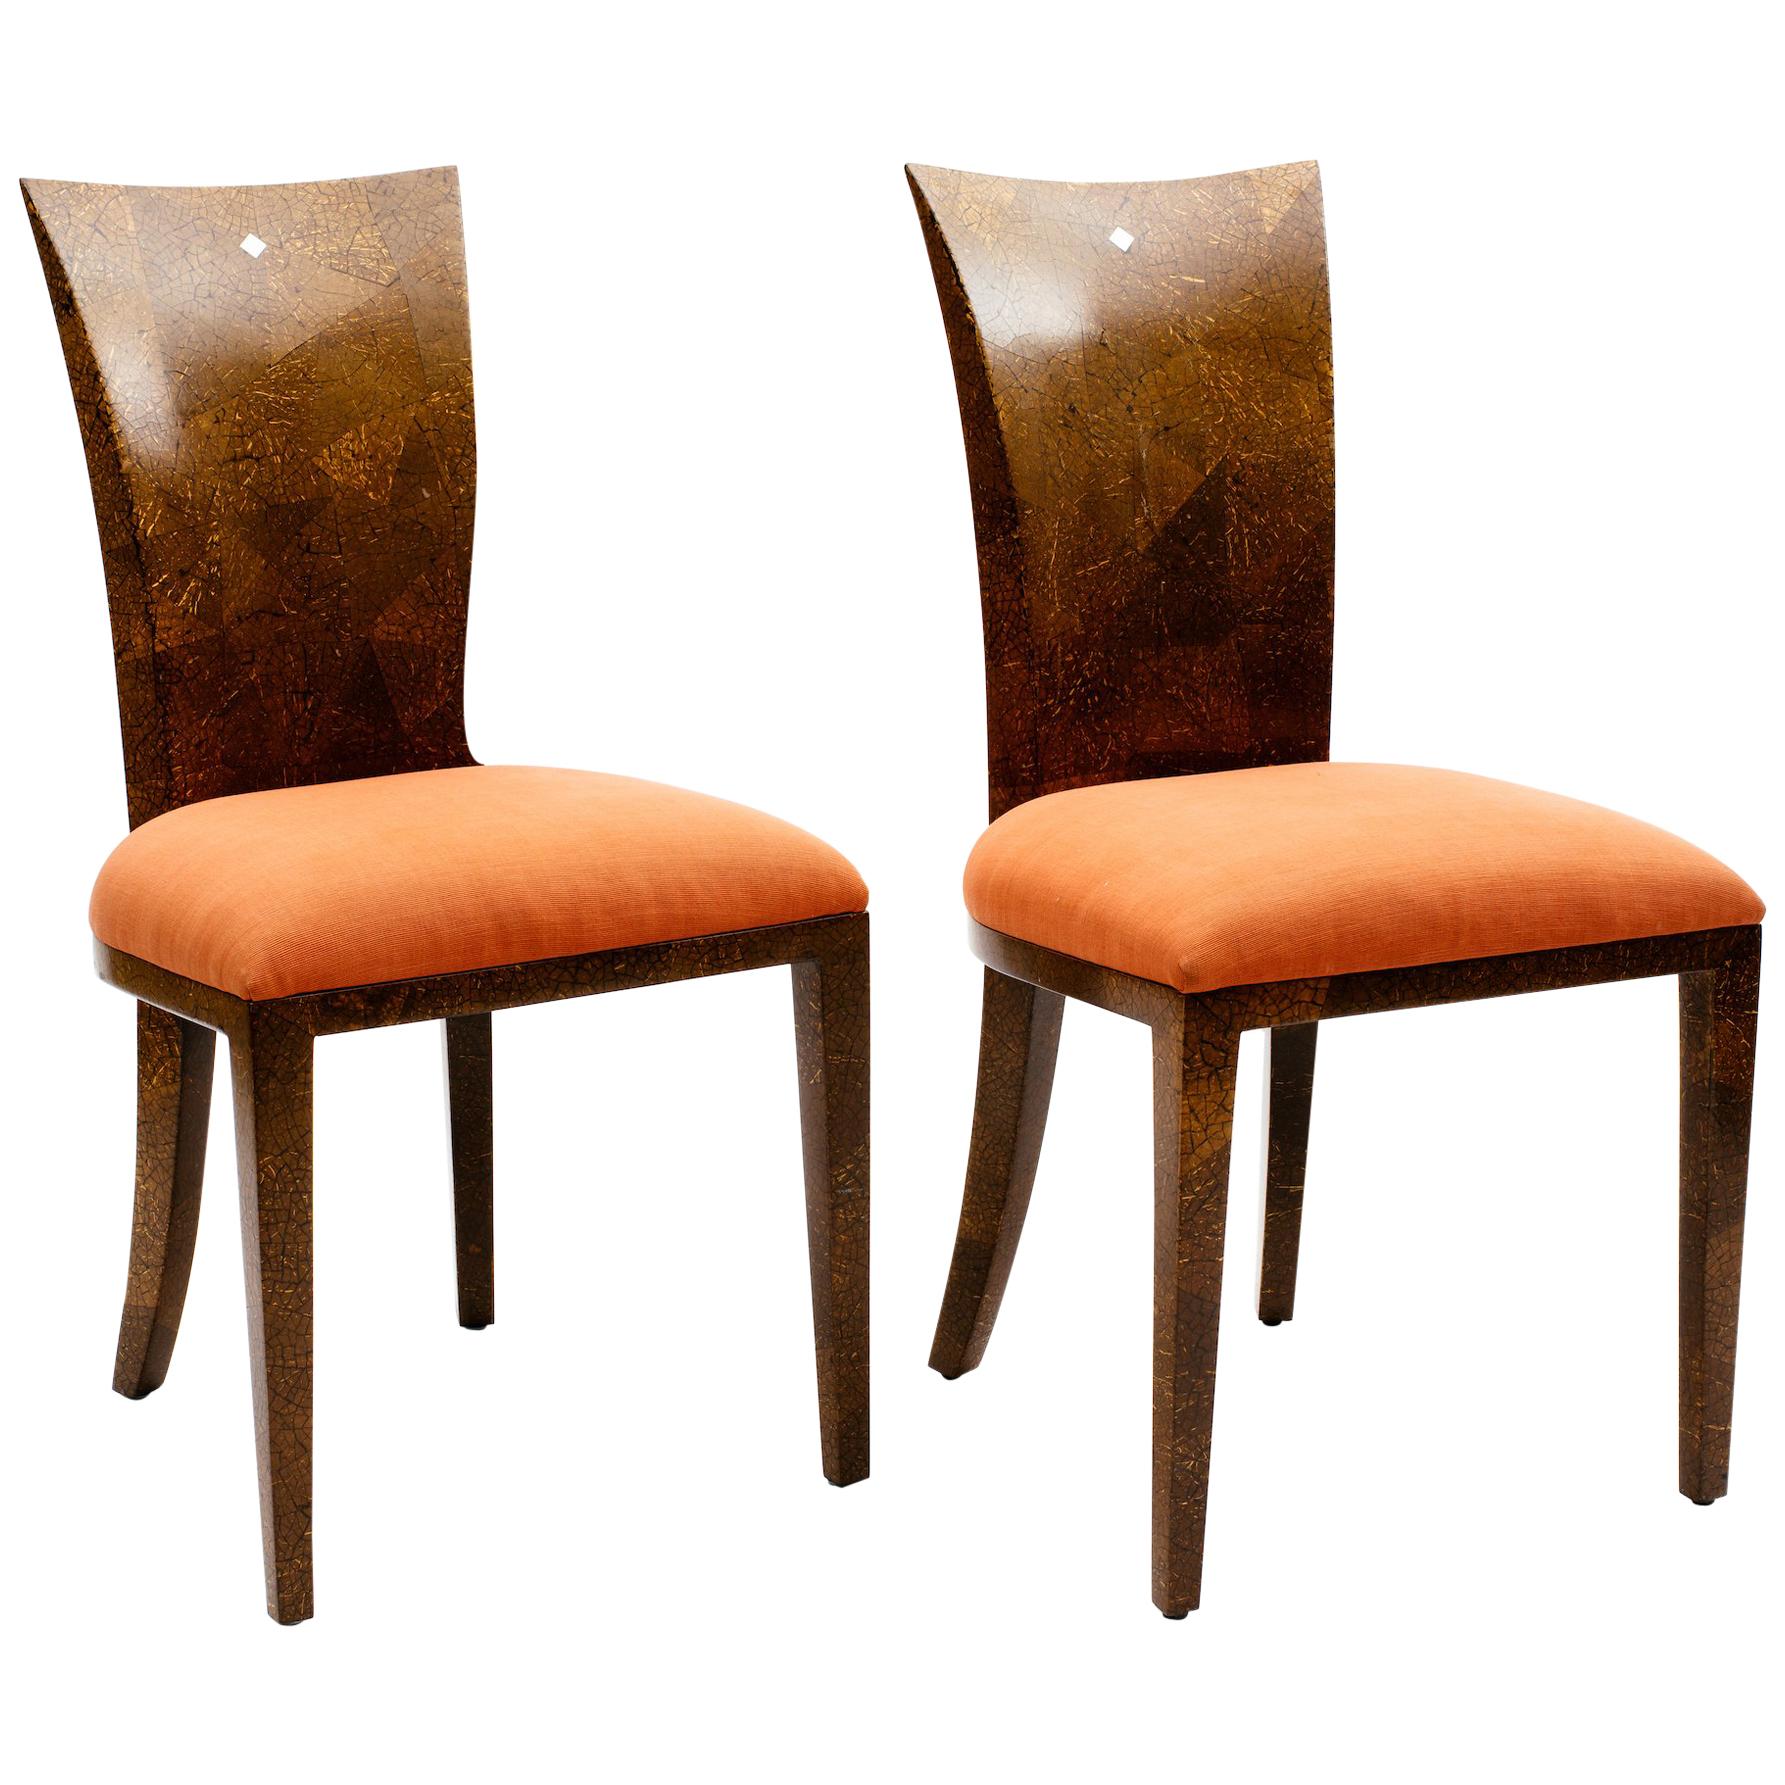 Pair of Coconut Shell Chairs with Mother of Pearl Inlay For Sale